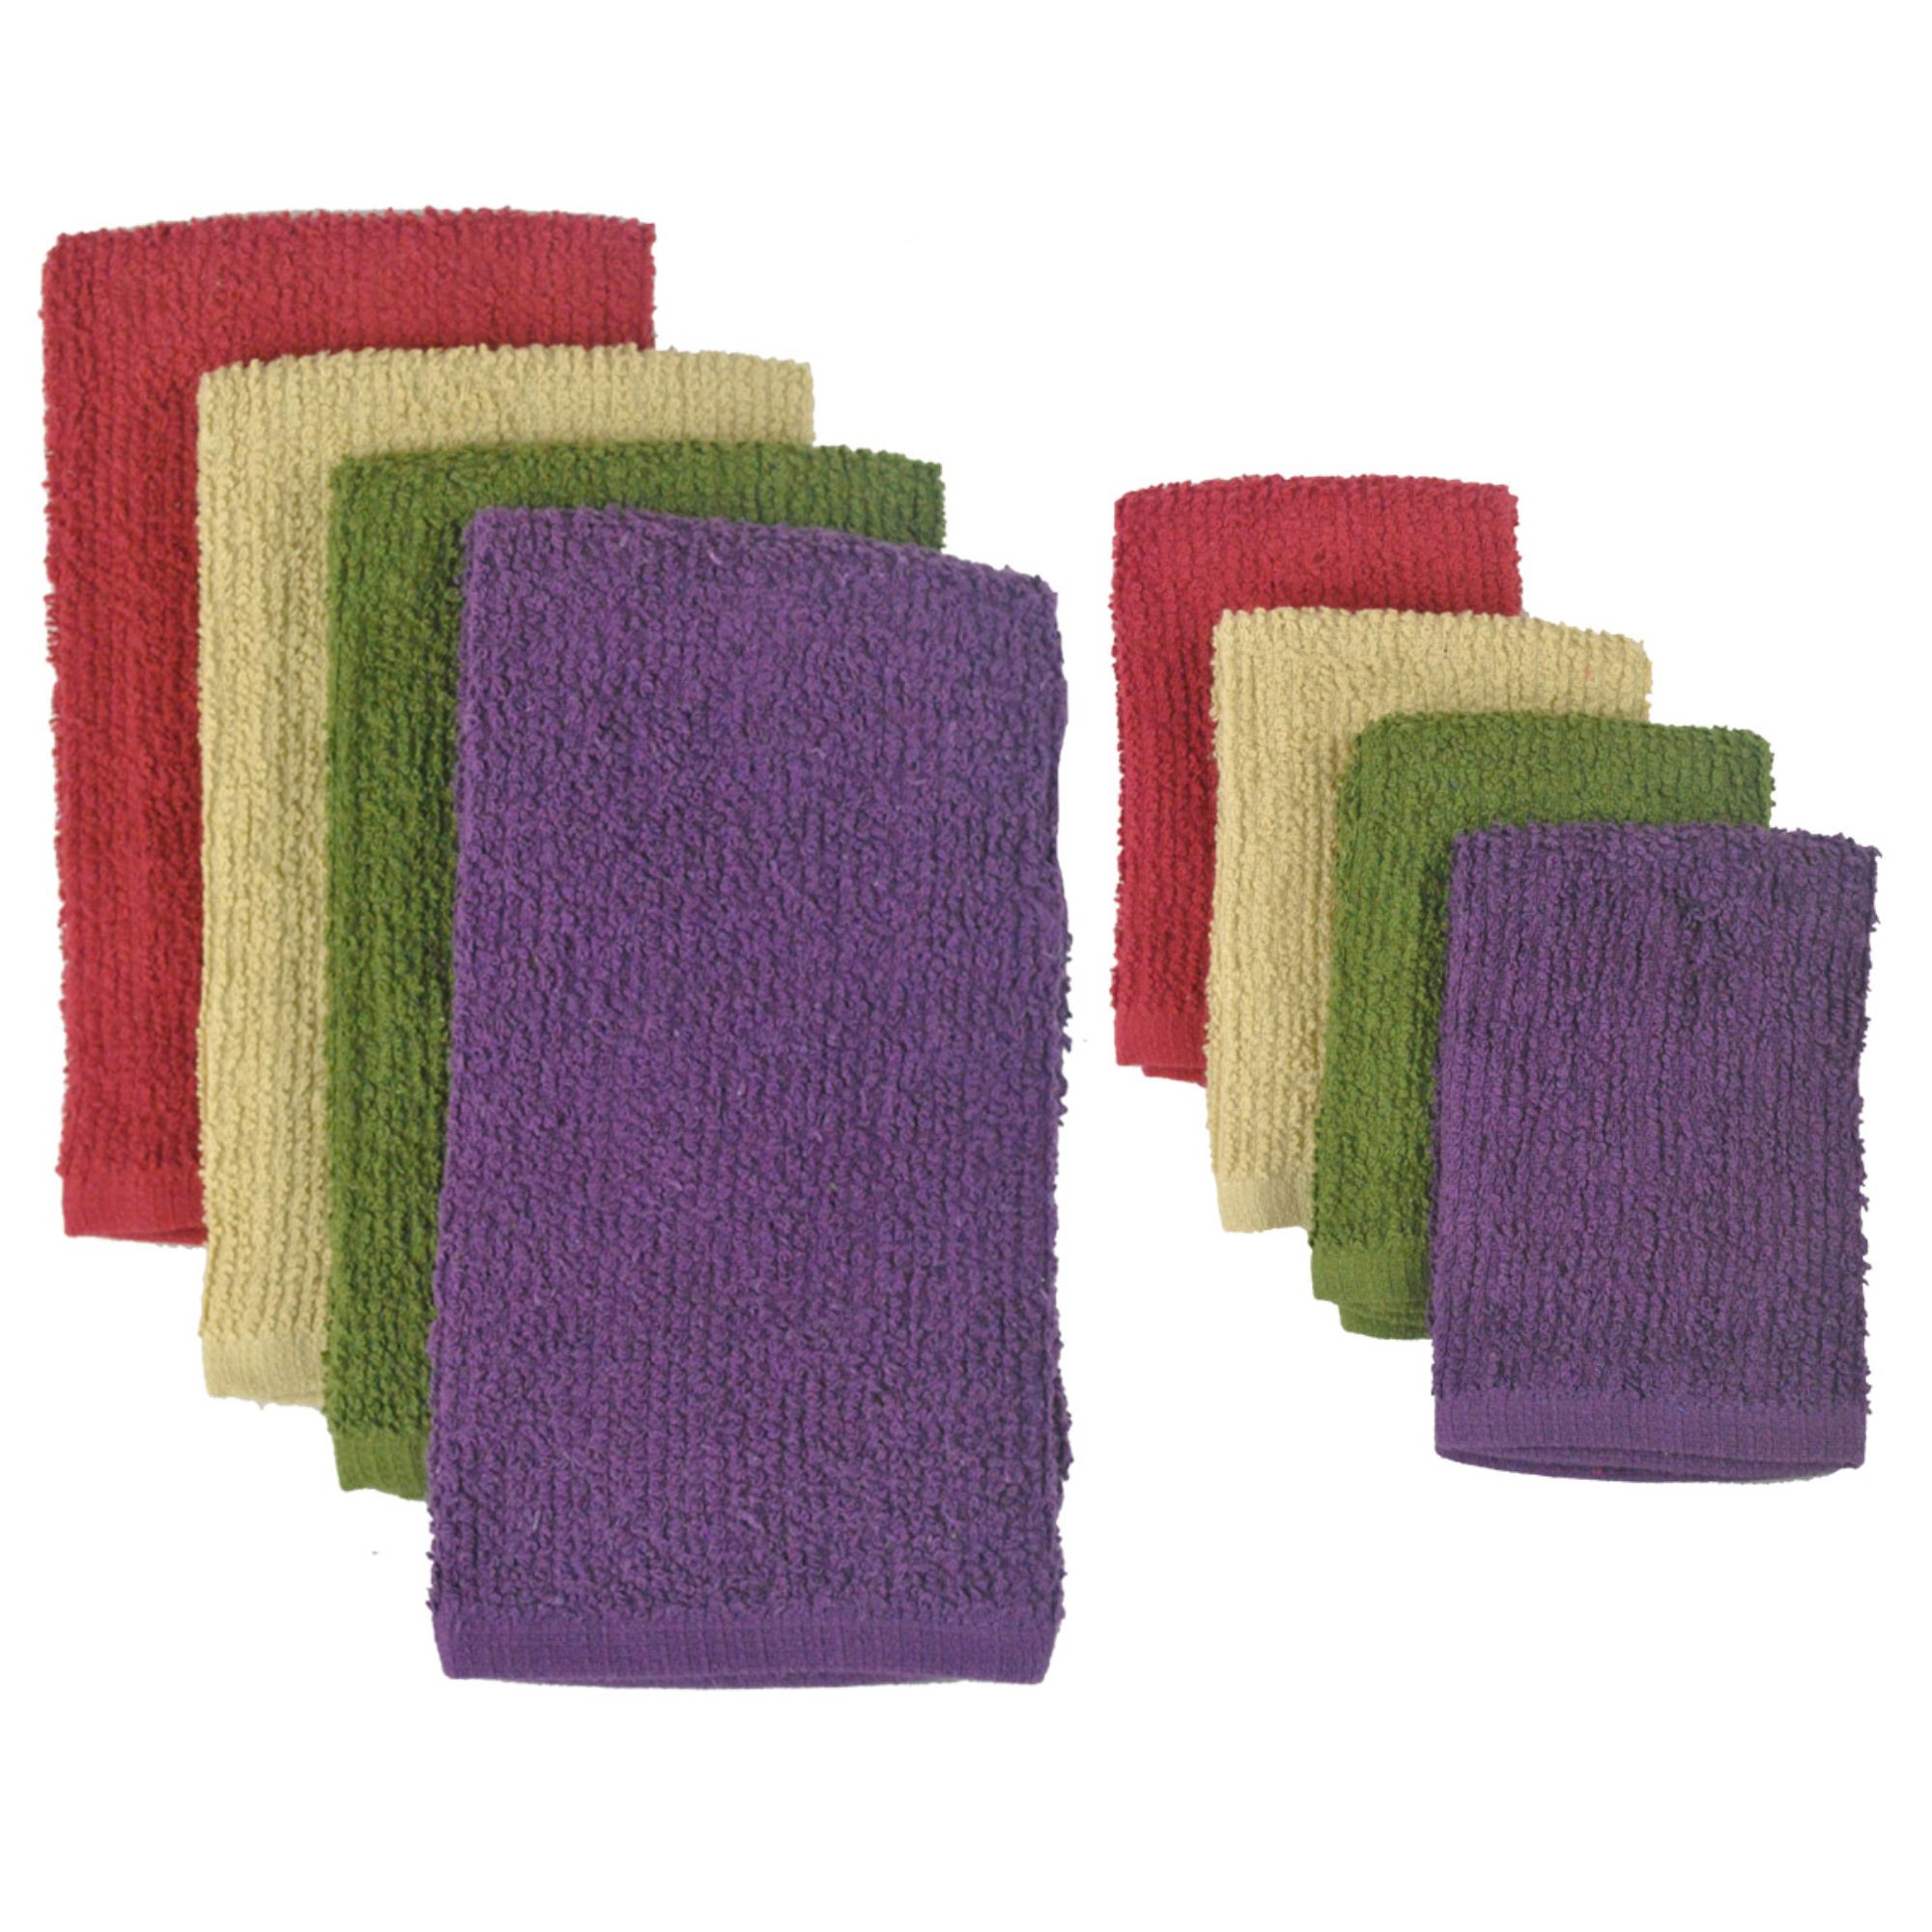 CC Home Furnishings Pack of 8 Solid Multi-Colored Dish Towel and Wash Cloth Kitchen Accessory Set - Terry Cloth